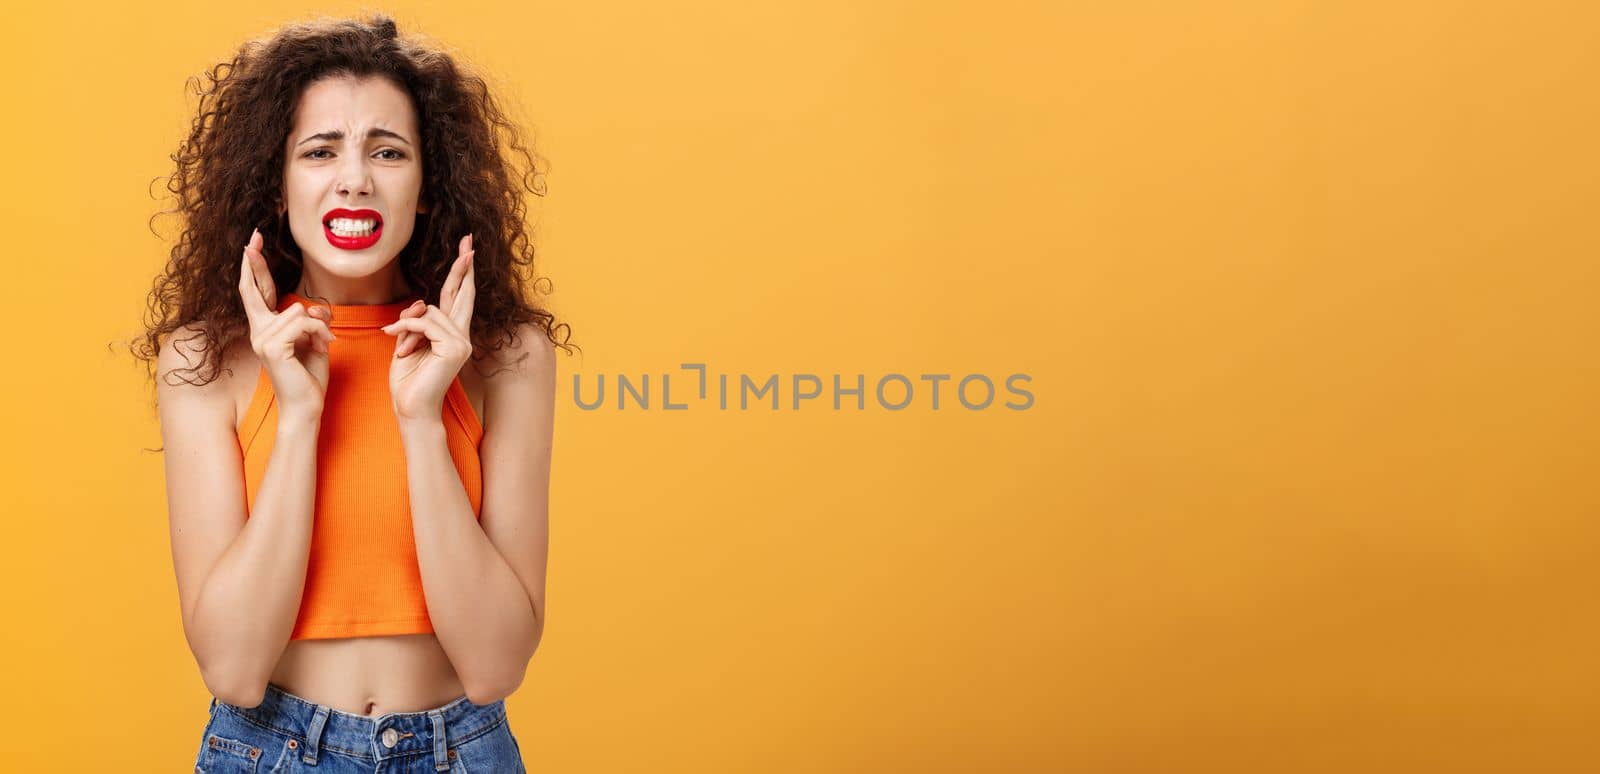 Concerned worried stylish urban girl. with curly hairstyle and red lipstick clenching teeth crossing fingers for good luck and frowning feeling nervous and anxious posing troubled over orange wall.